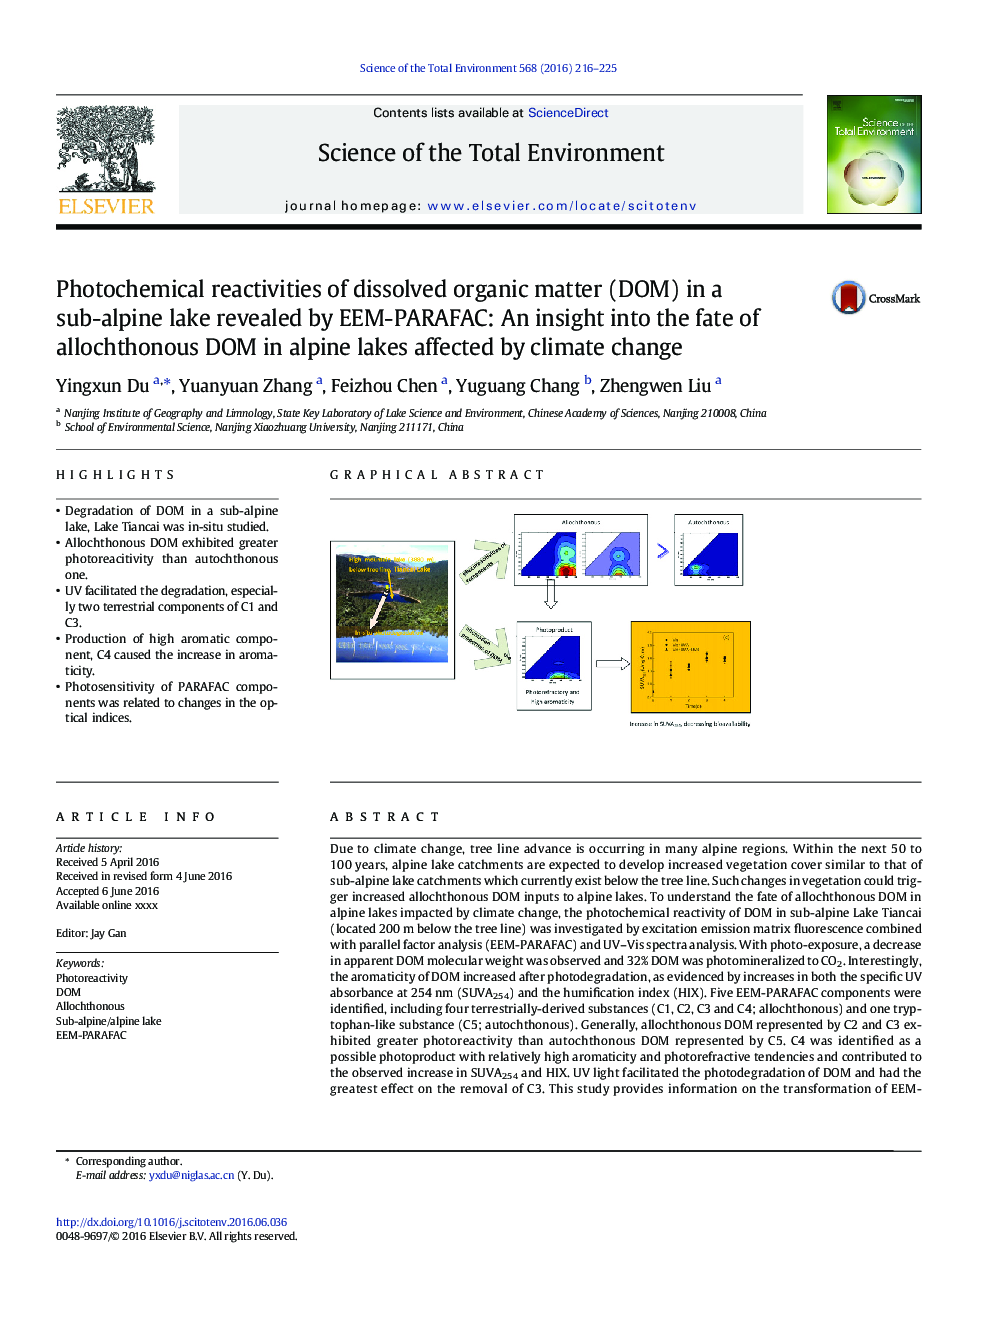 Photochemical reactivities of dissolved organic matter (DOM) in a sub-alpine lake revealed by EEM-PARAFAC: An insight into the fate of allochthonous DOM in alpine lakes affected by climate change